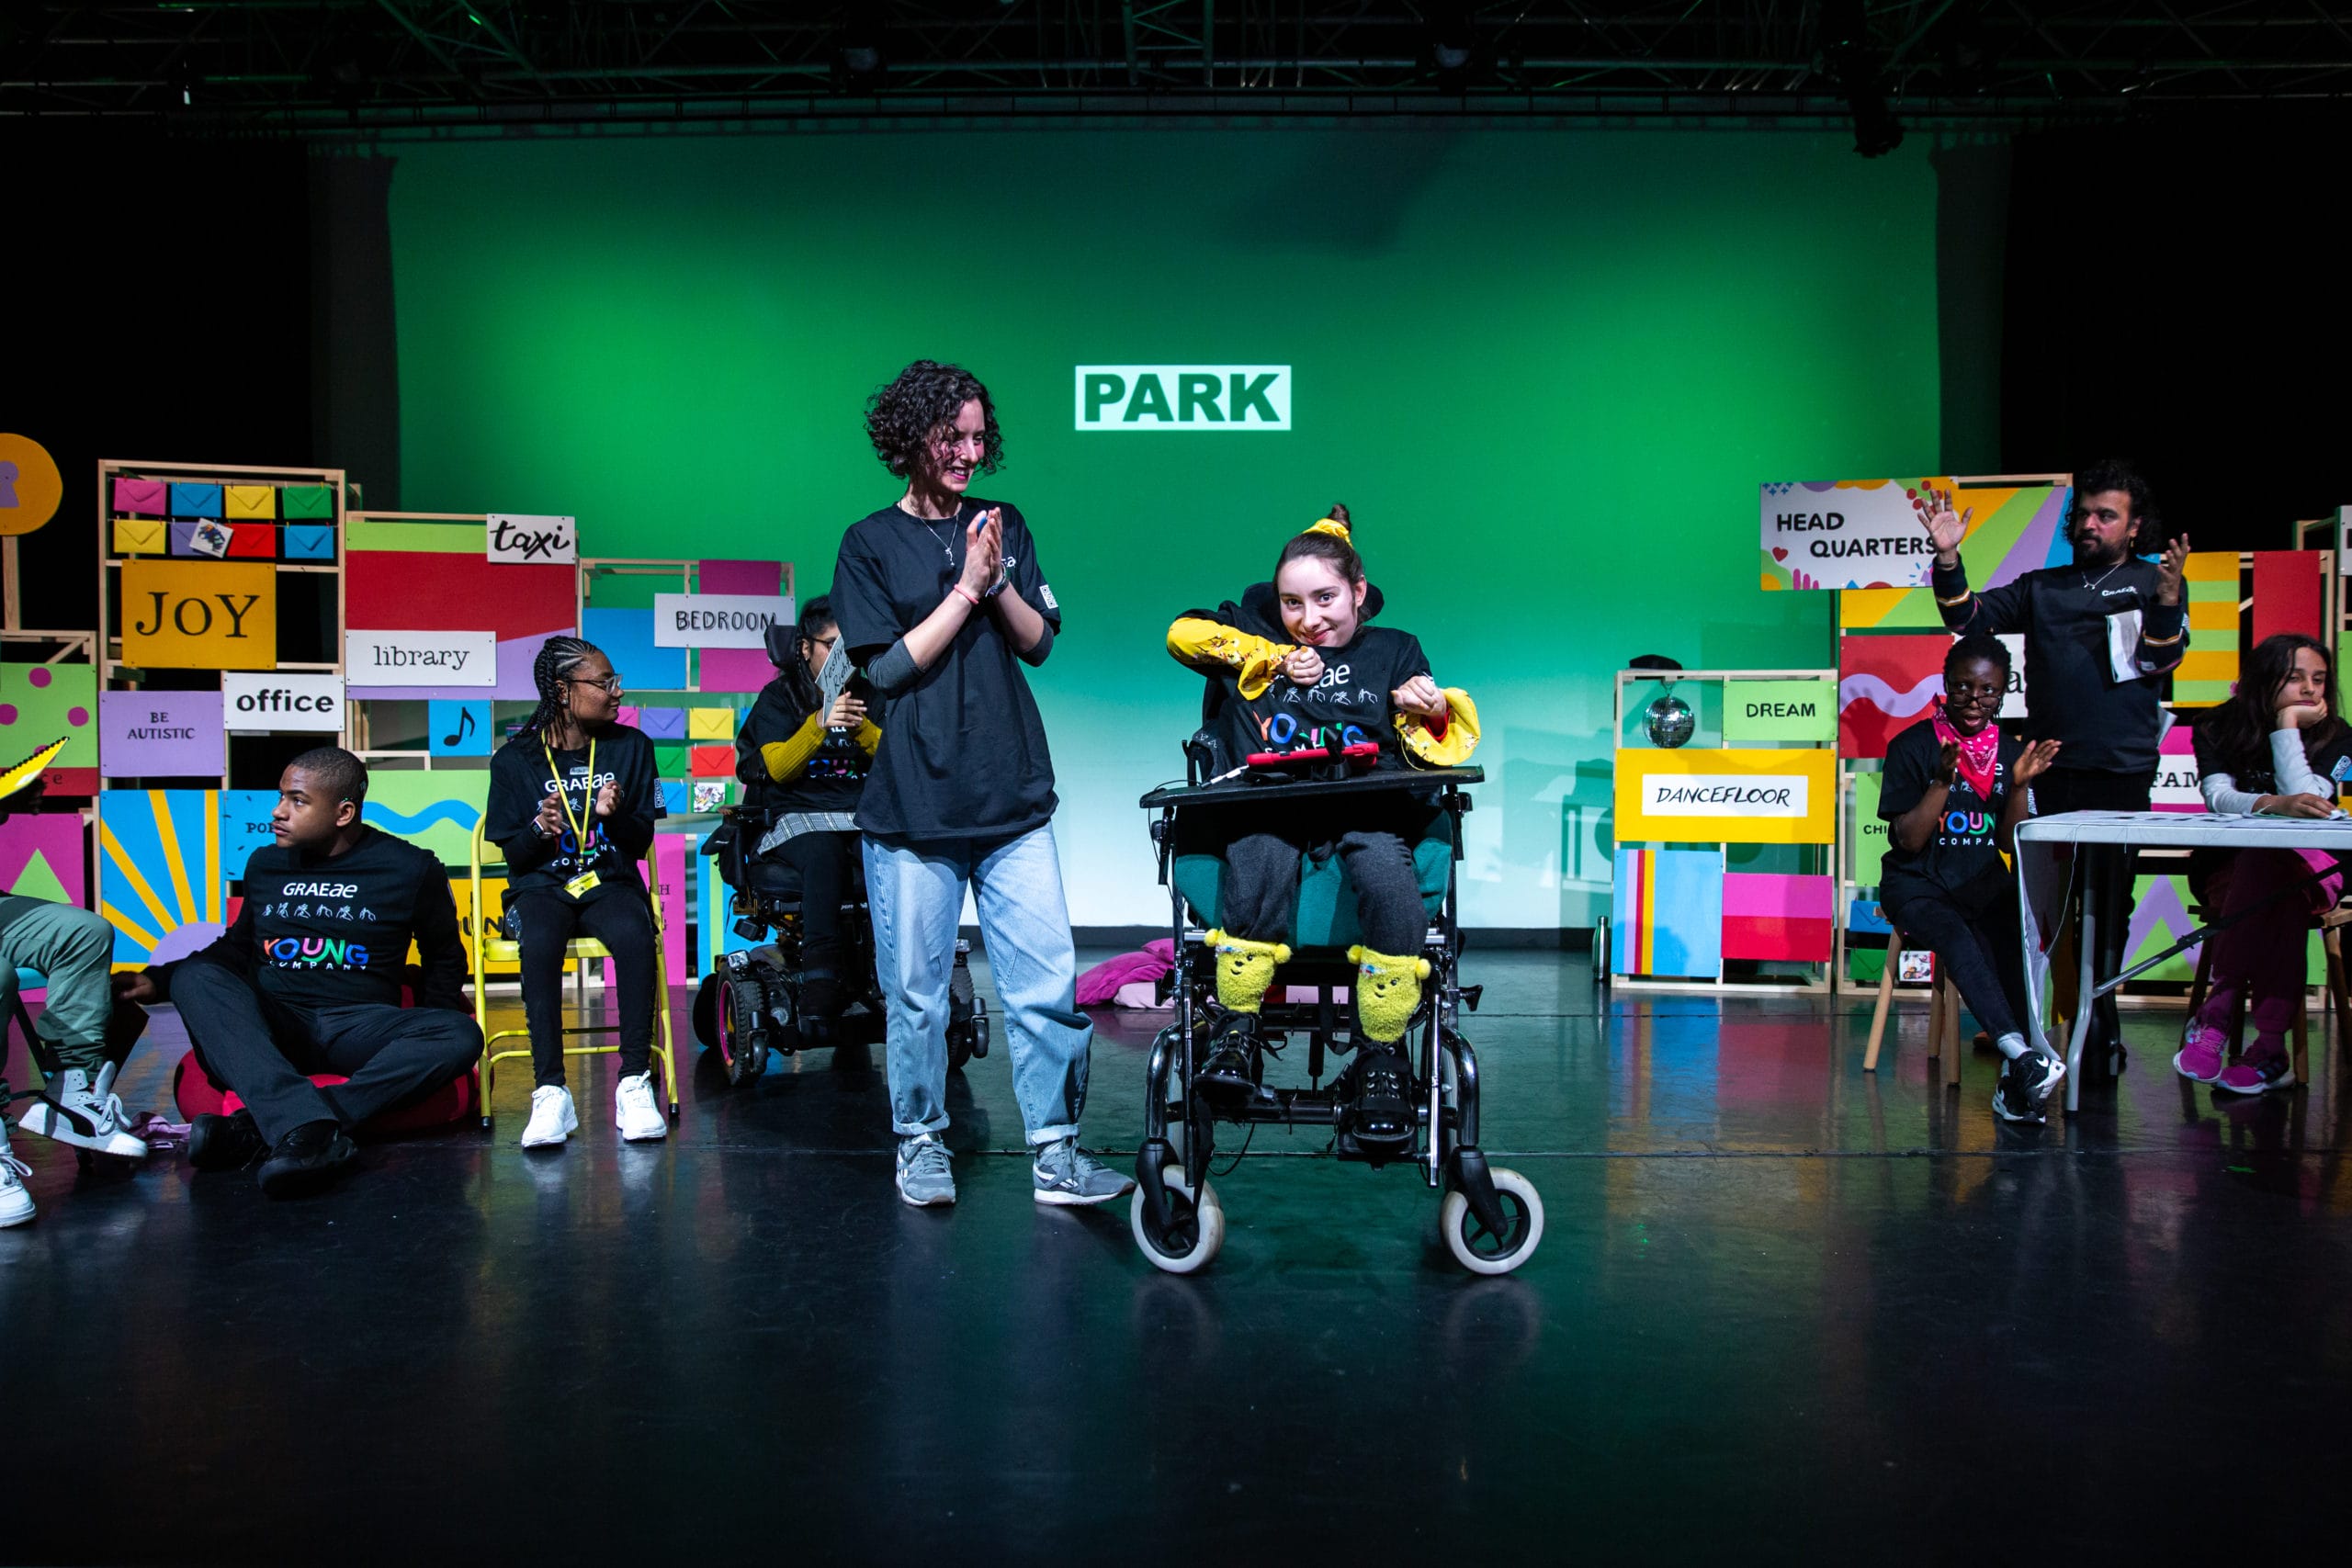 A performer in a wheelchair is centre stage, surrounded by other performers who are clapping along.